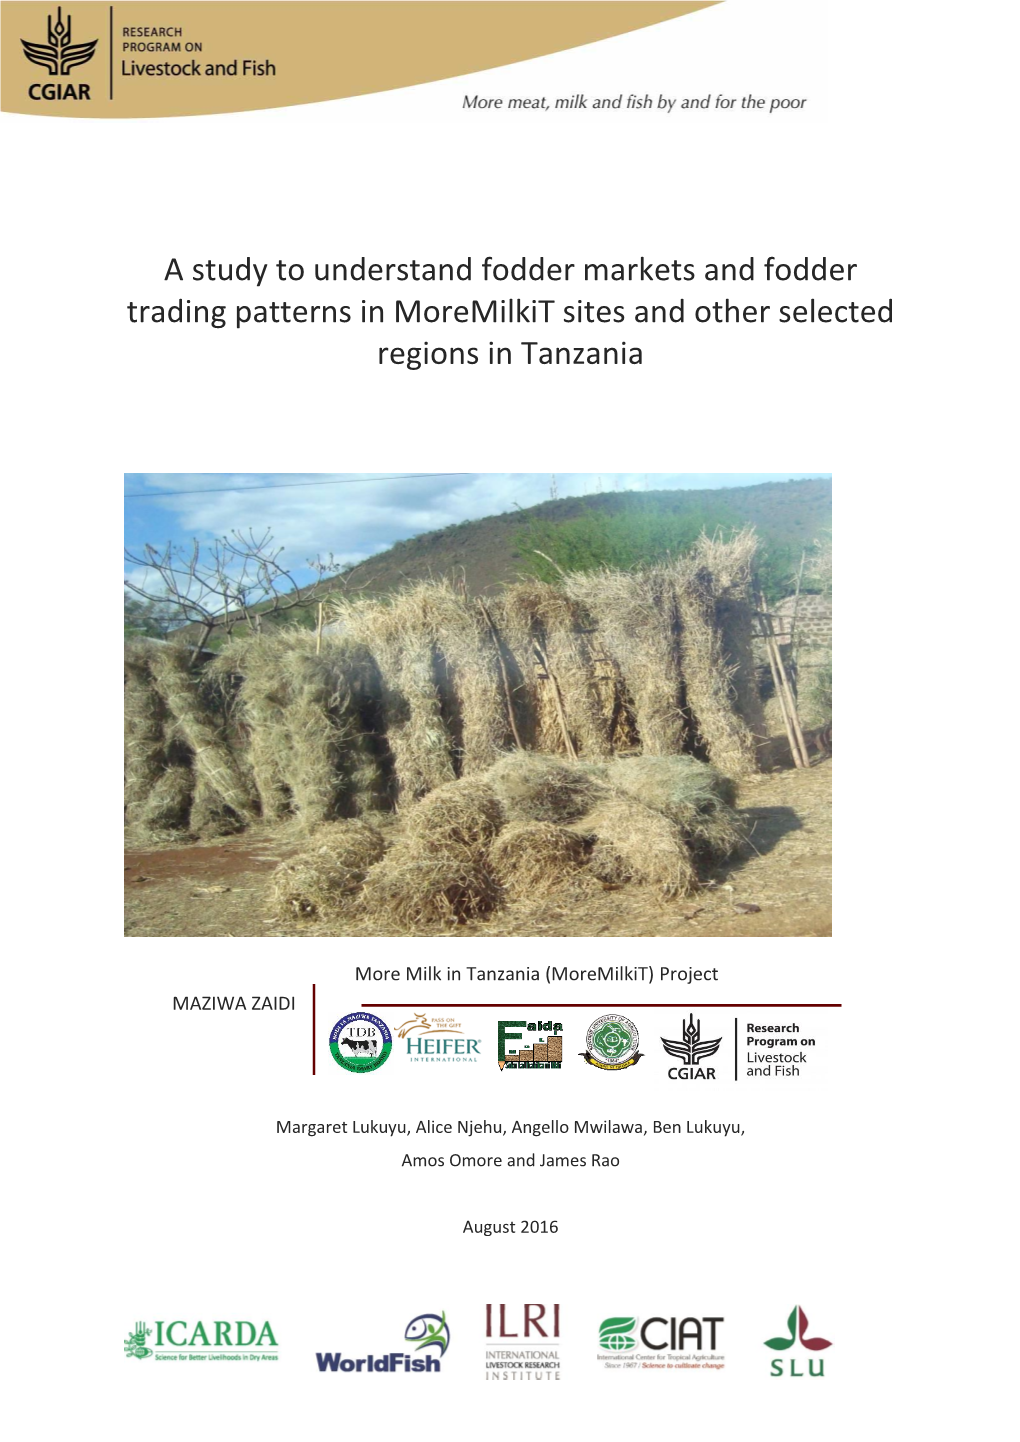 Fodder Markets Study and to Identify Potential Interventions for Improving Market Performance, and Improving Utilization of Quality Forage